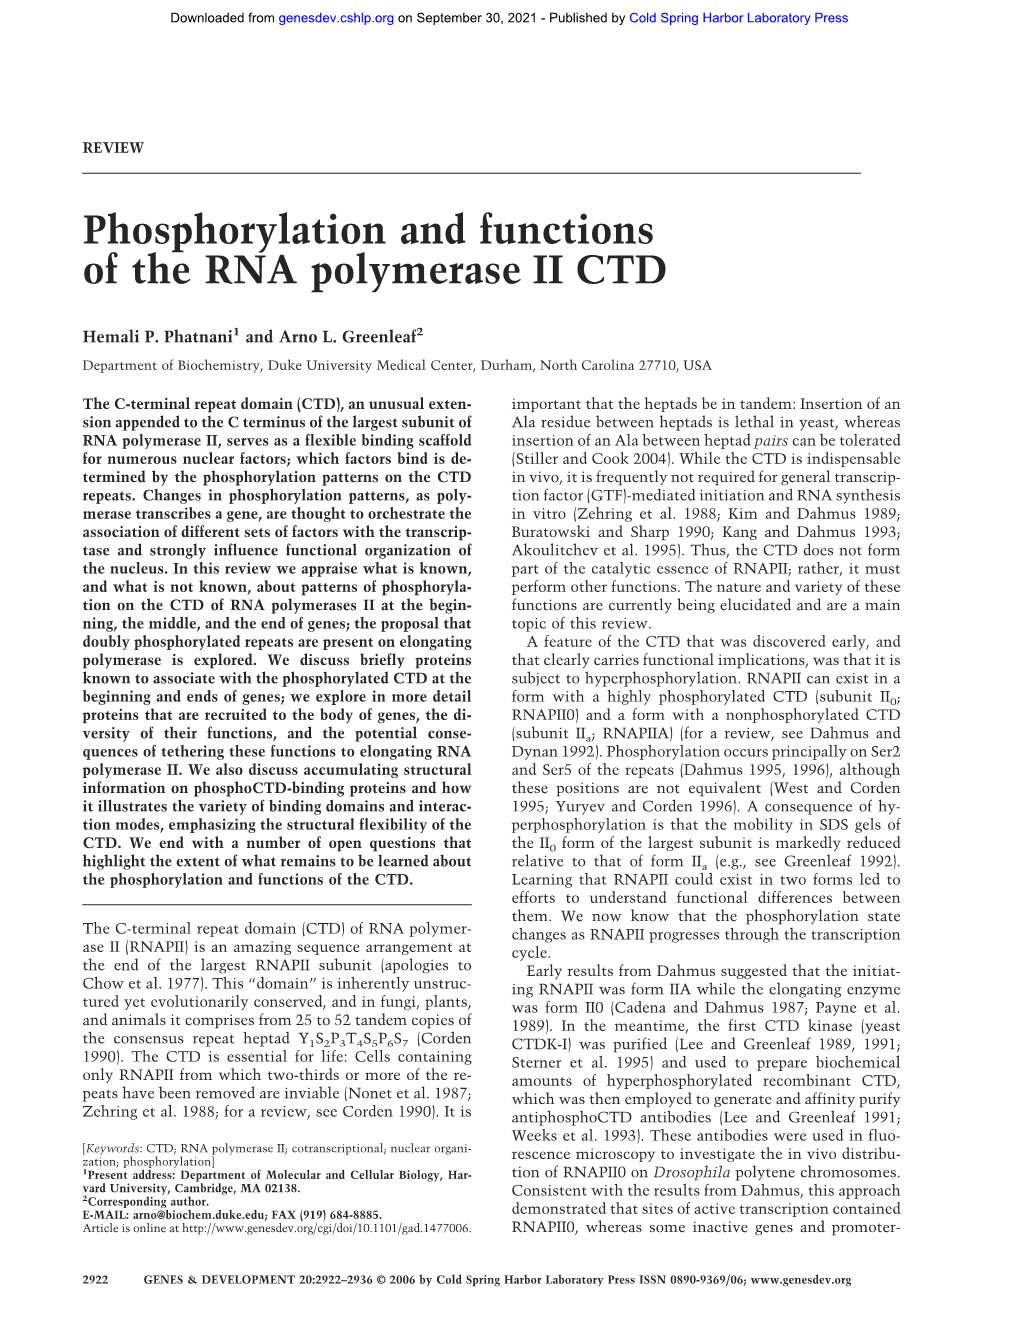 Phosphorylation and Functions of the RNA Polymerase II CTD